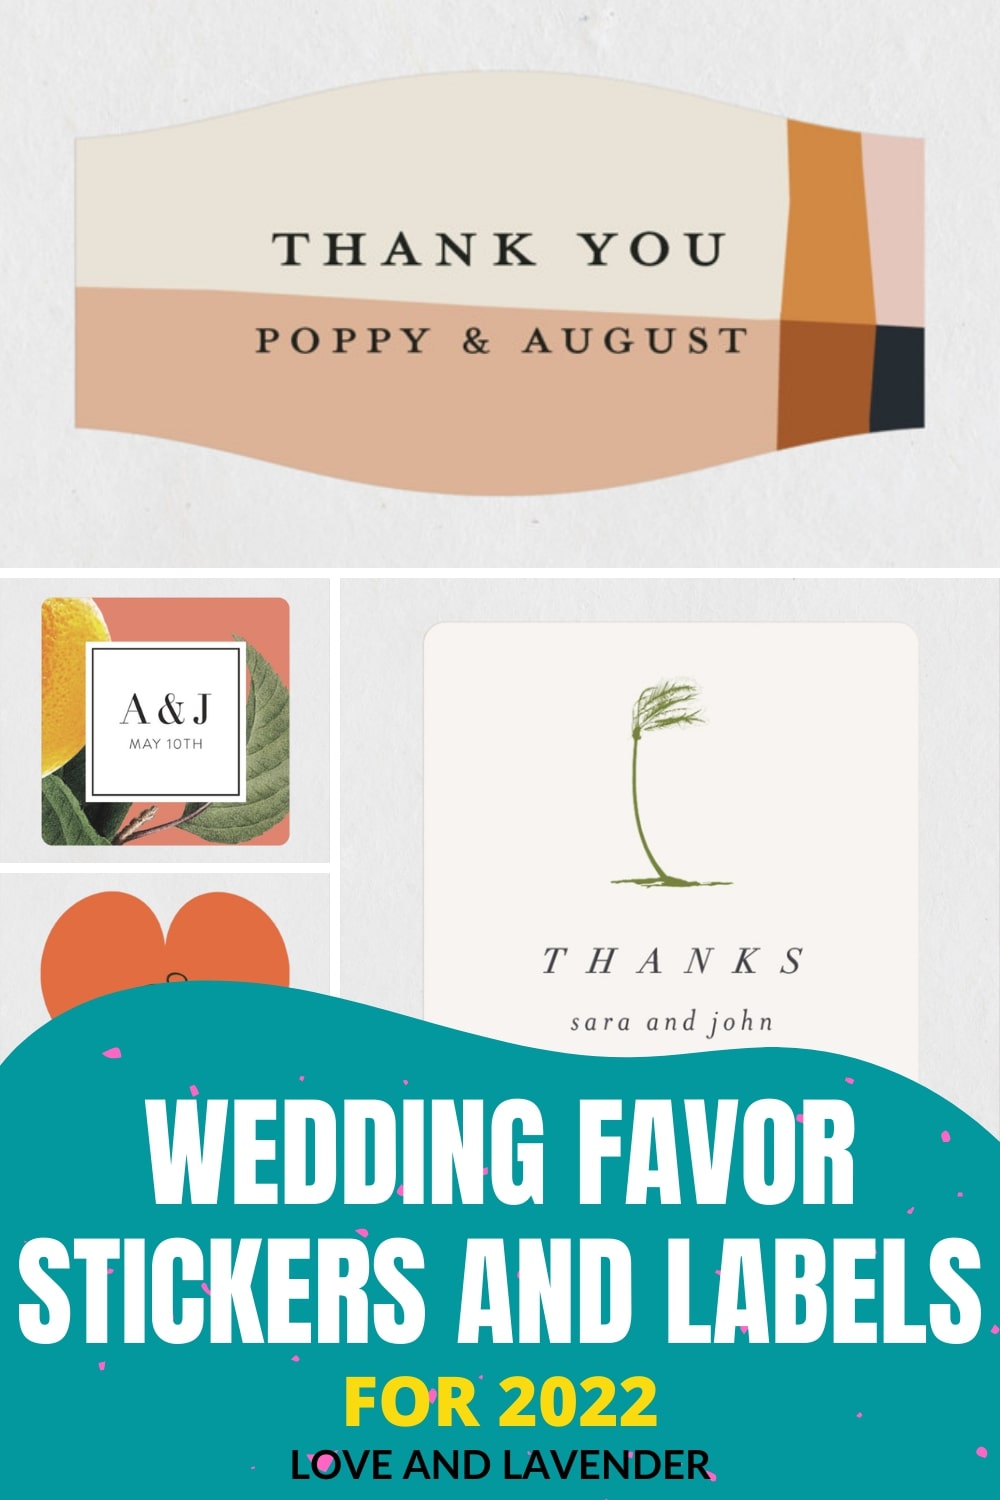 13 Wedding Favor Stickers that We Love! (and You Will Too)